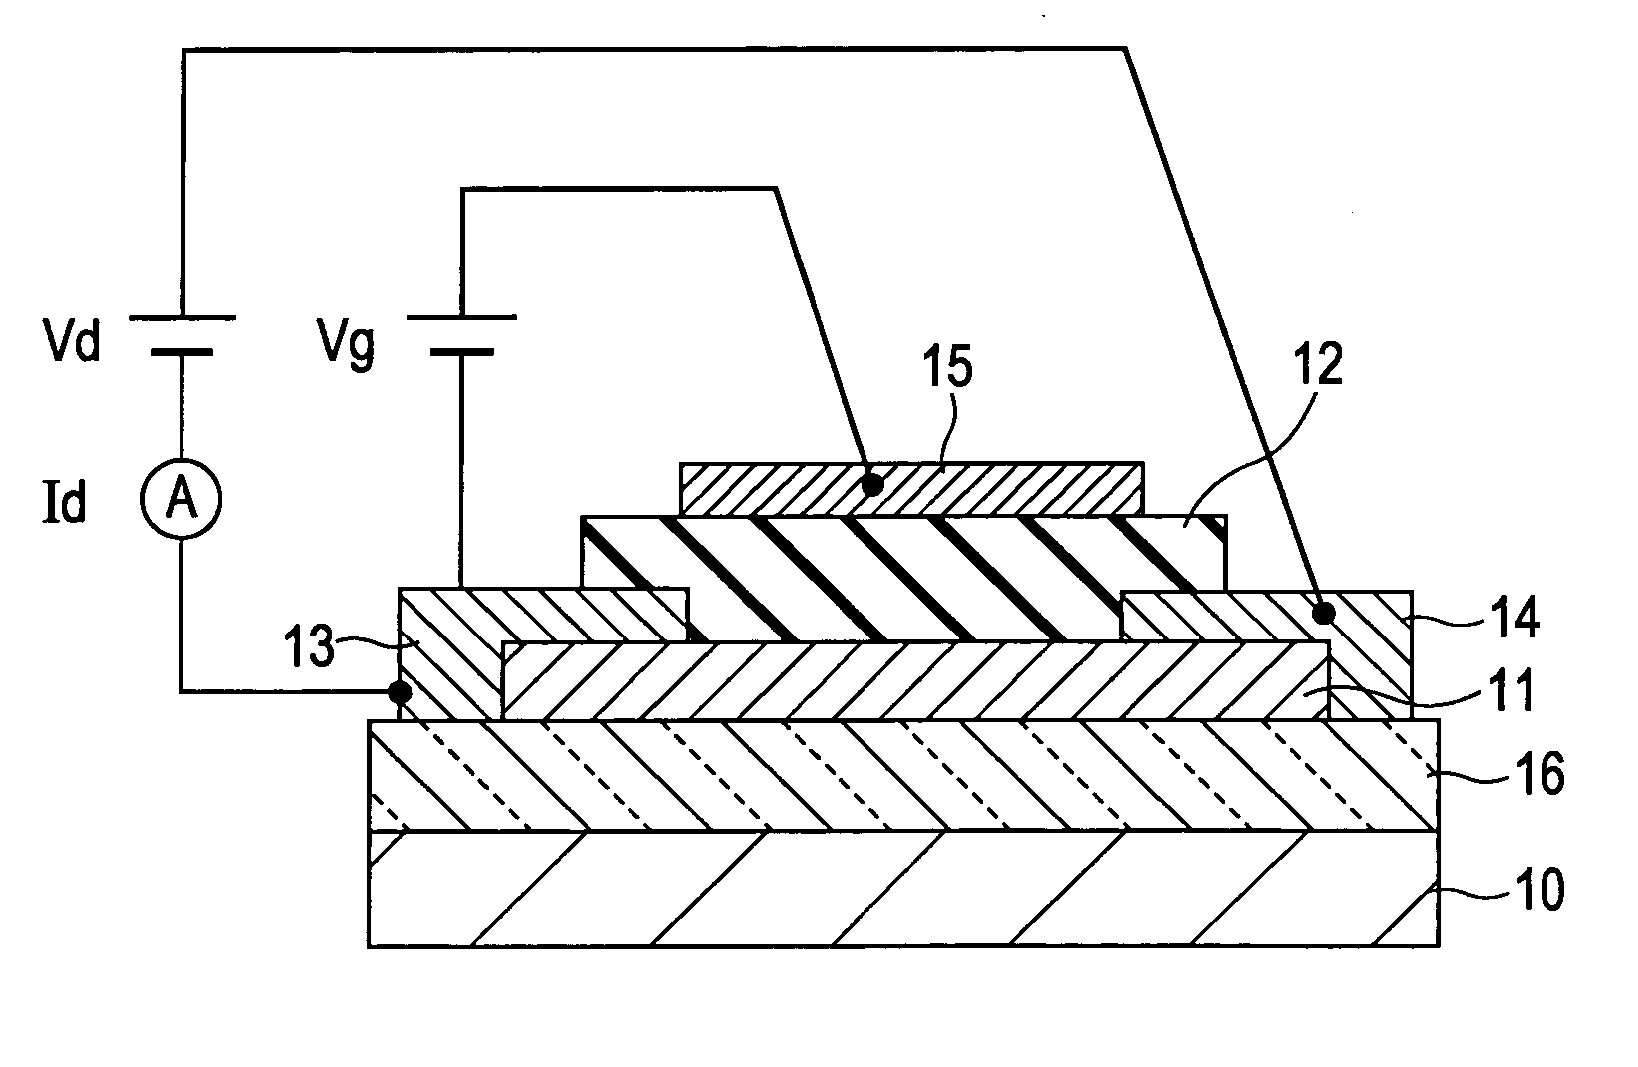 Thin-film transistor and thin-film diode having amorphous-oxide semiconductor layer